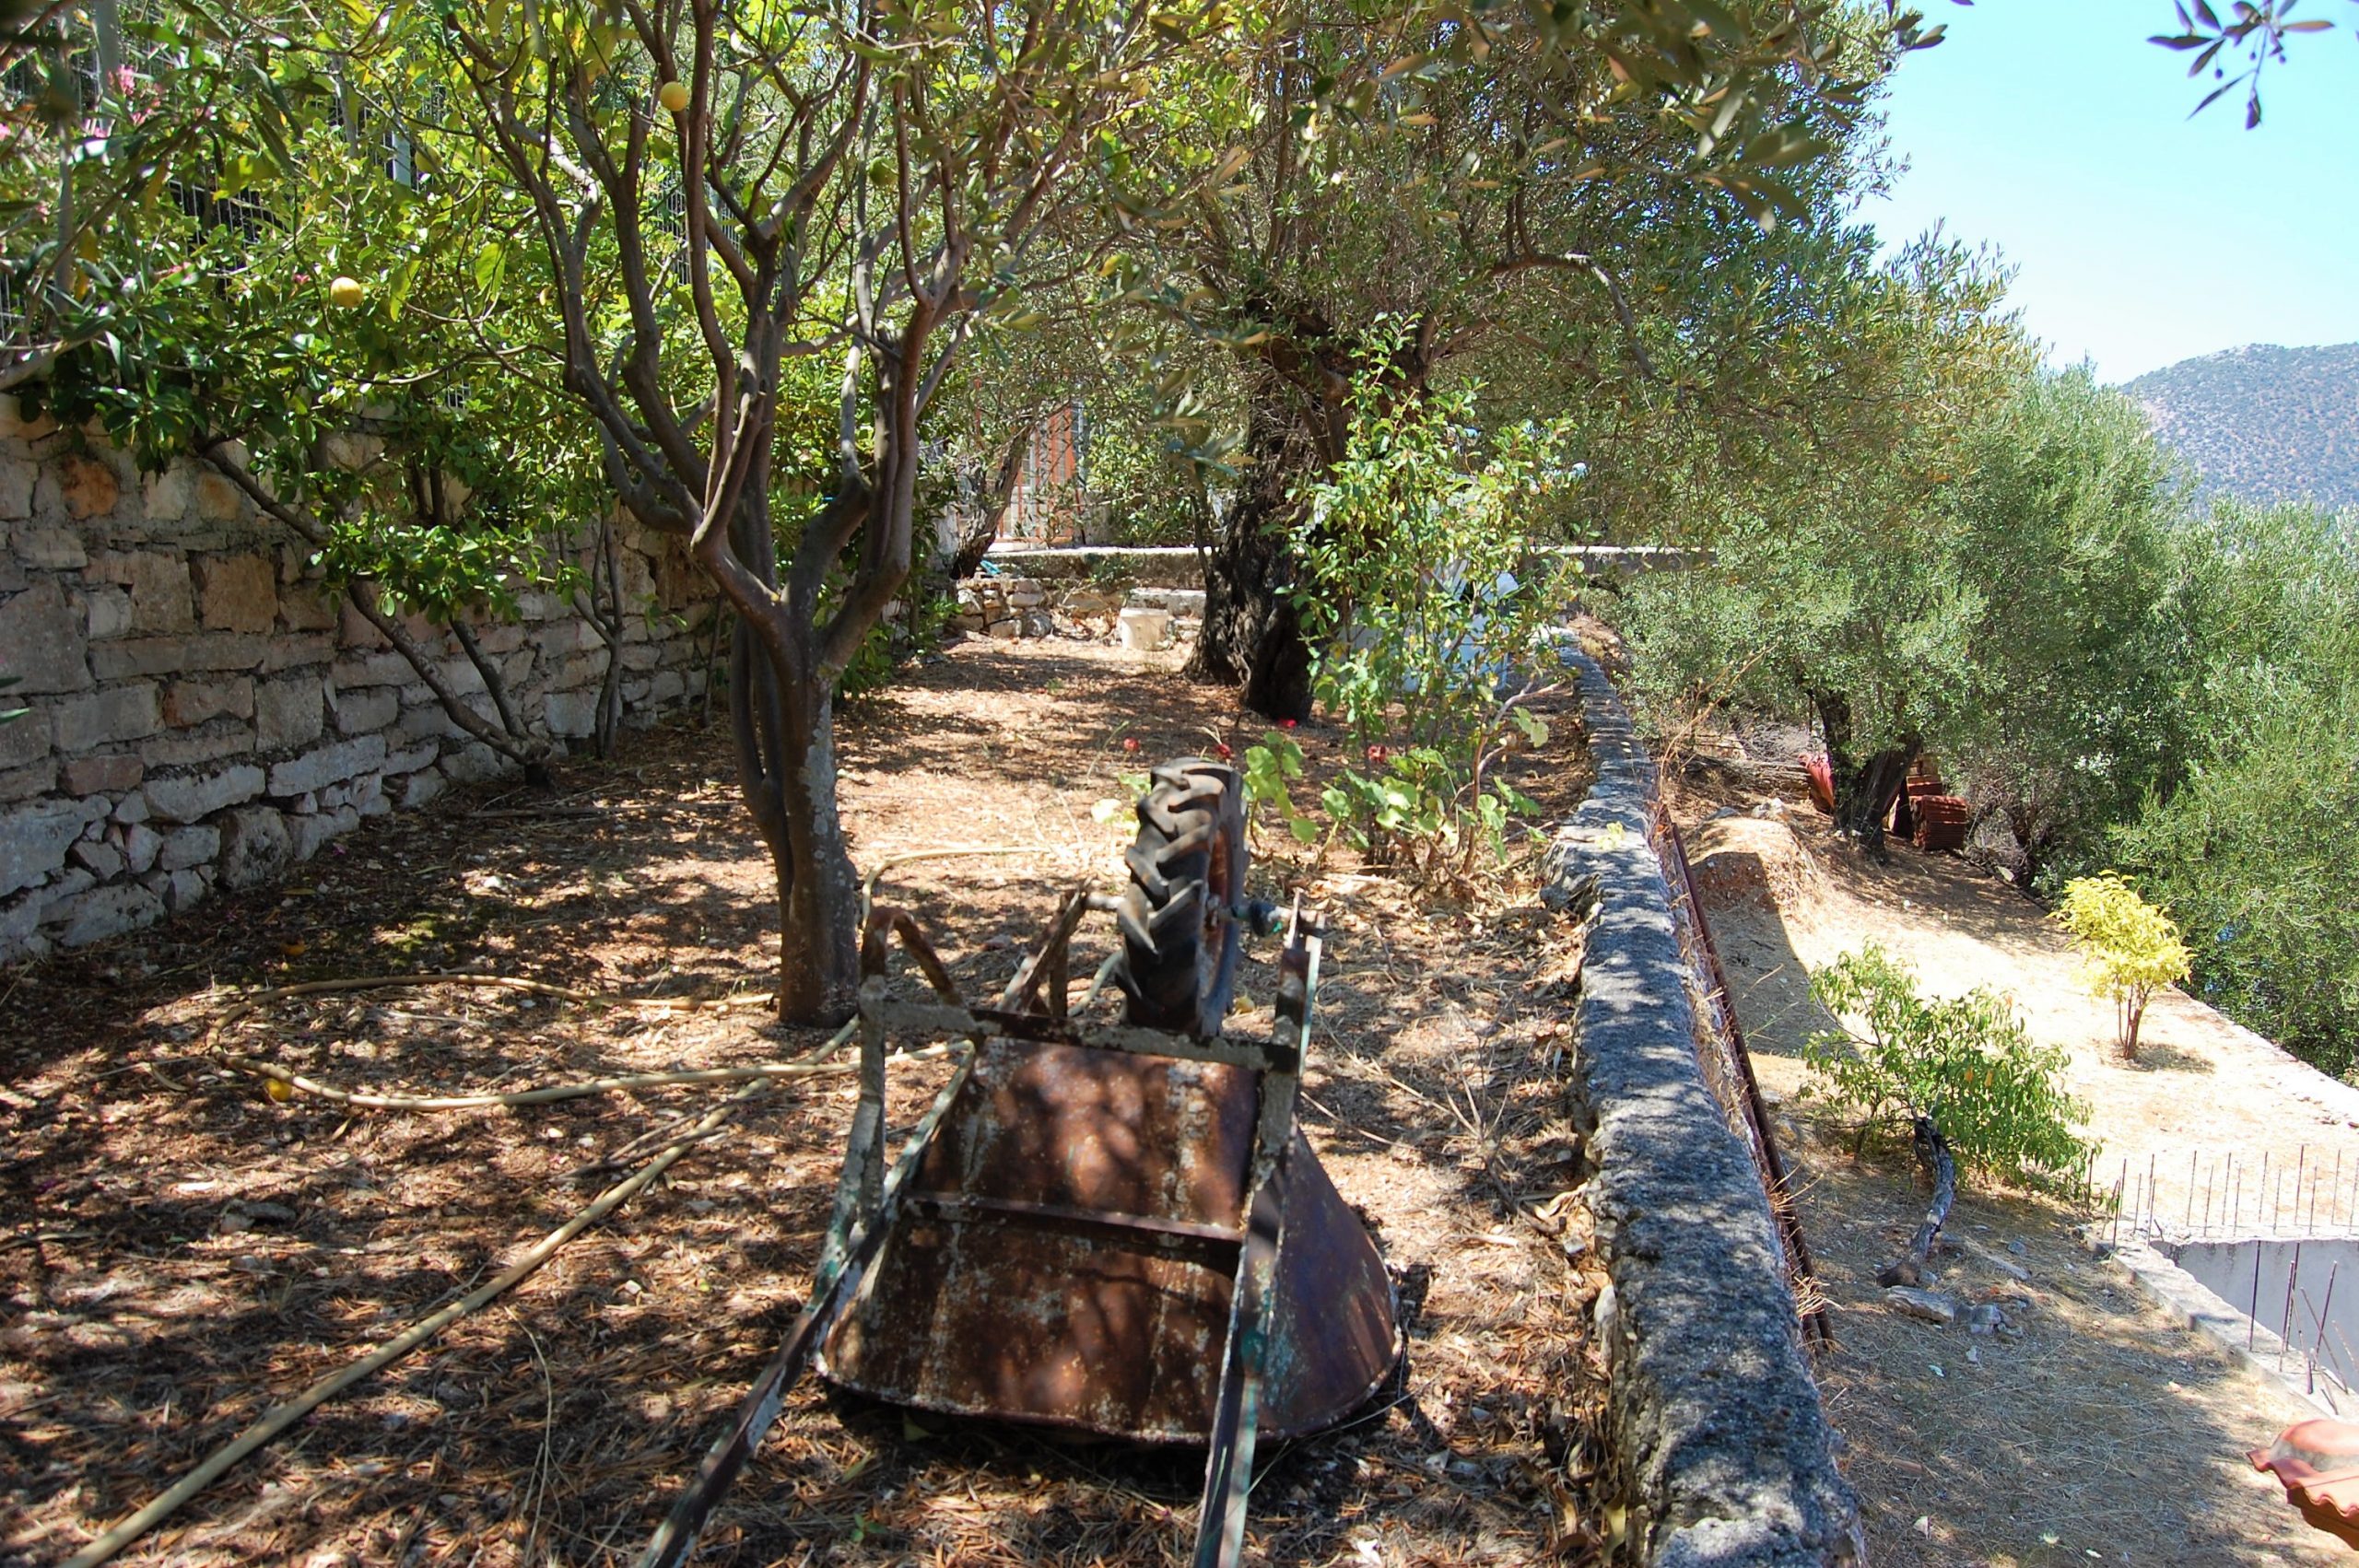 Exterior and terrace of coastal house for sale in Ithaca Greece Vathi